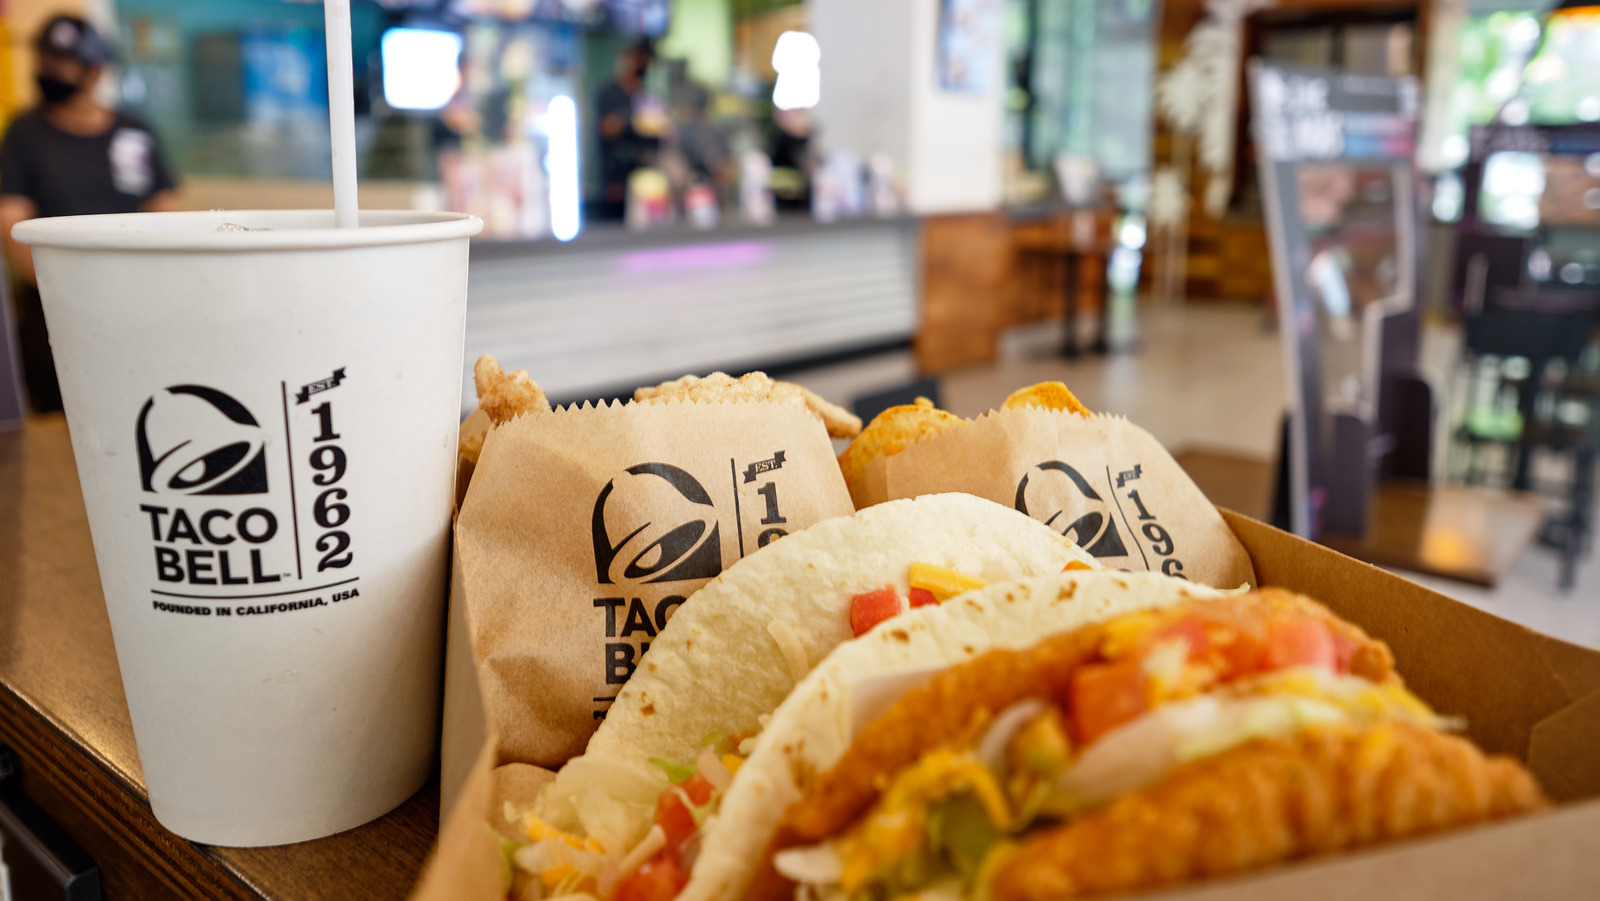 Why Taco Bell Stopped Selling Shredded Chicken